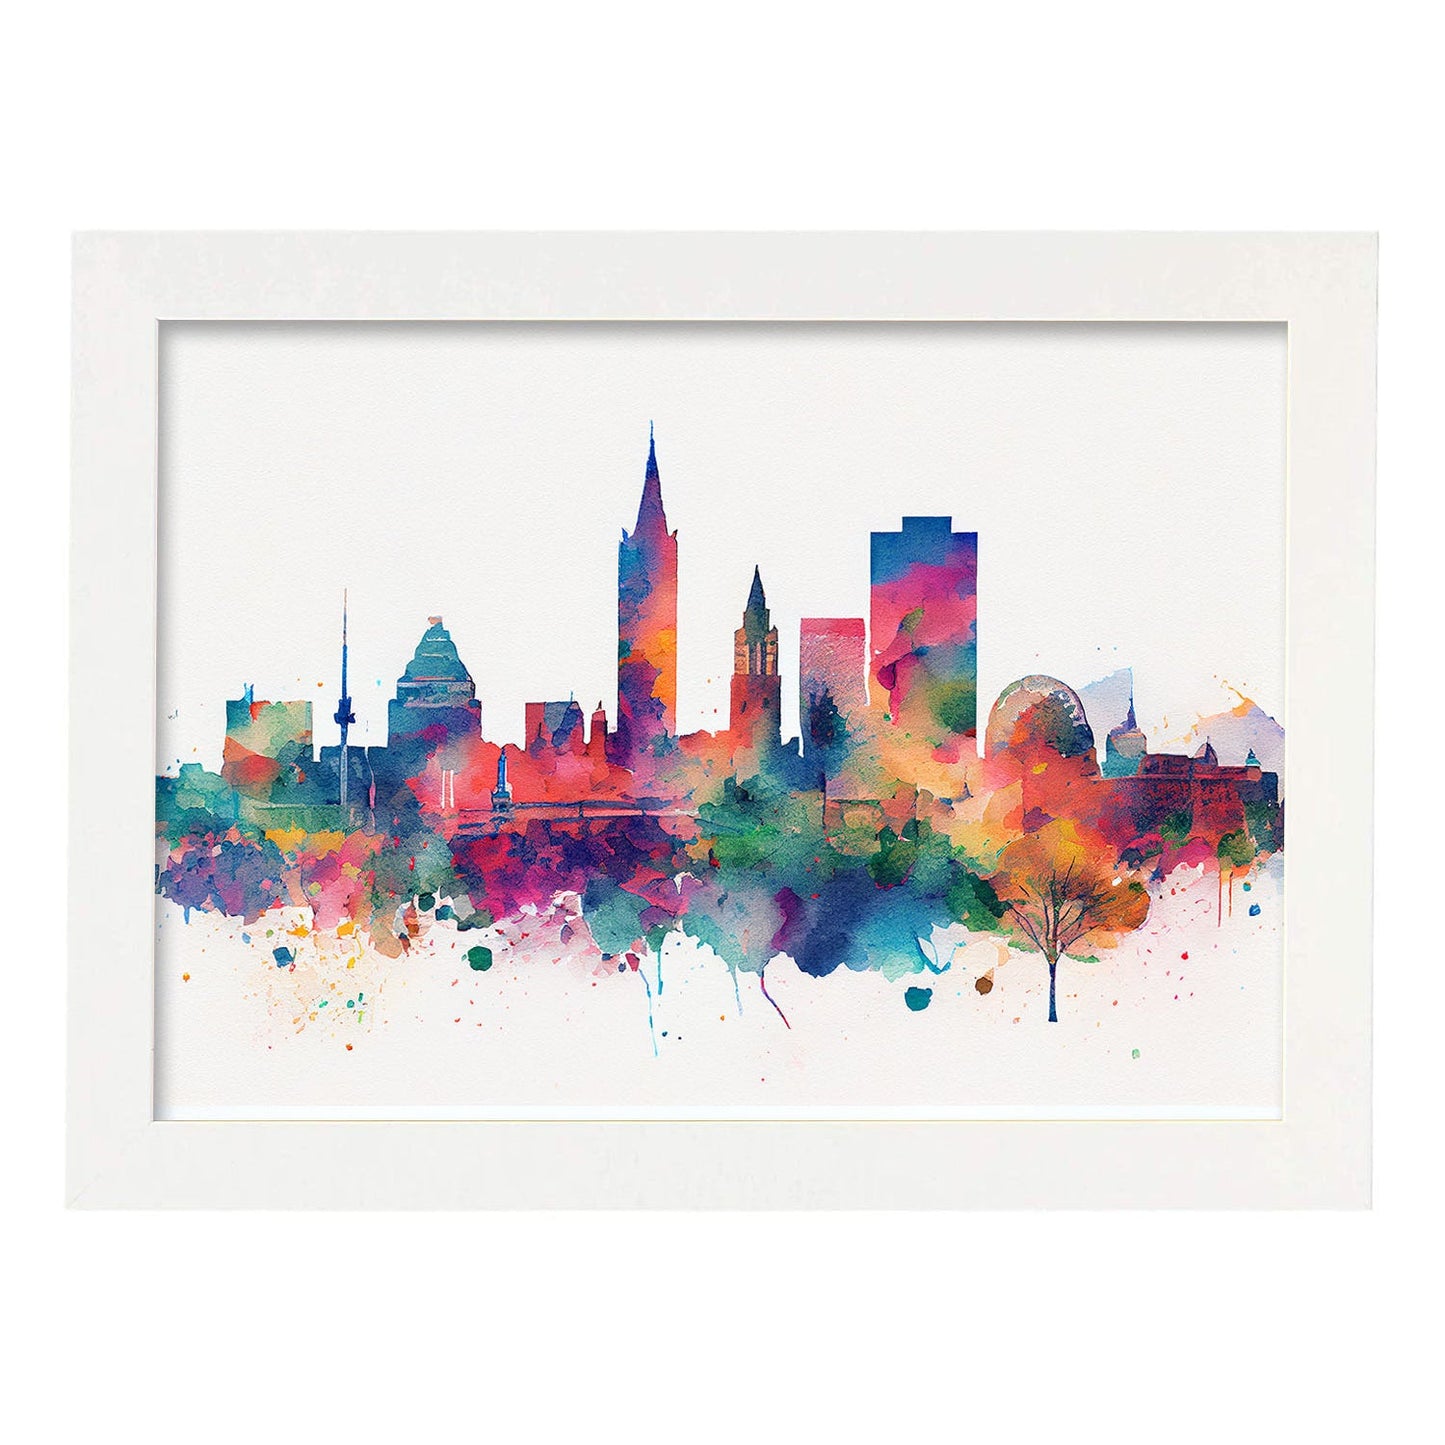 Nacnic watercolor of a skyline of the city of Birmingham. Aesthetic Wall Art Prints for Bedroom or Living Room Design.-Artwork-Nacnic-A4-Marco Blanco-Nacnic Estudio SL